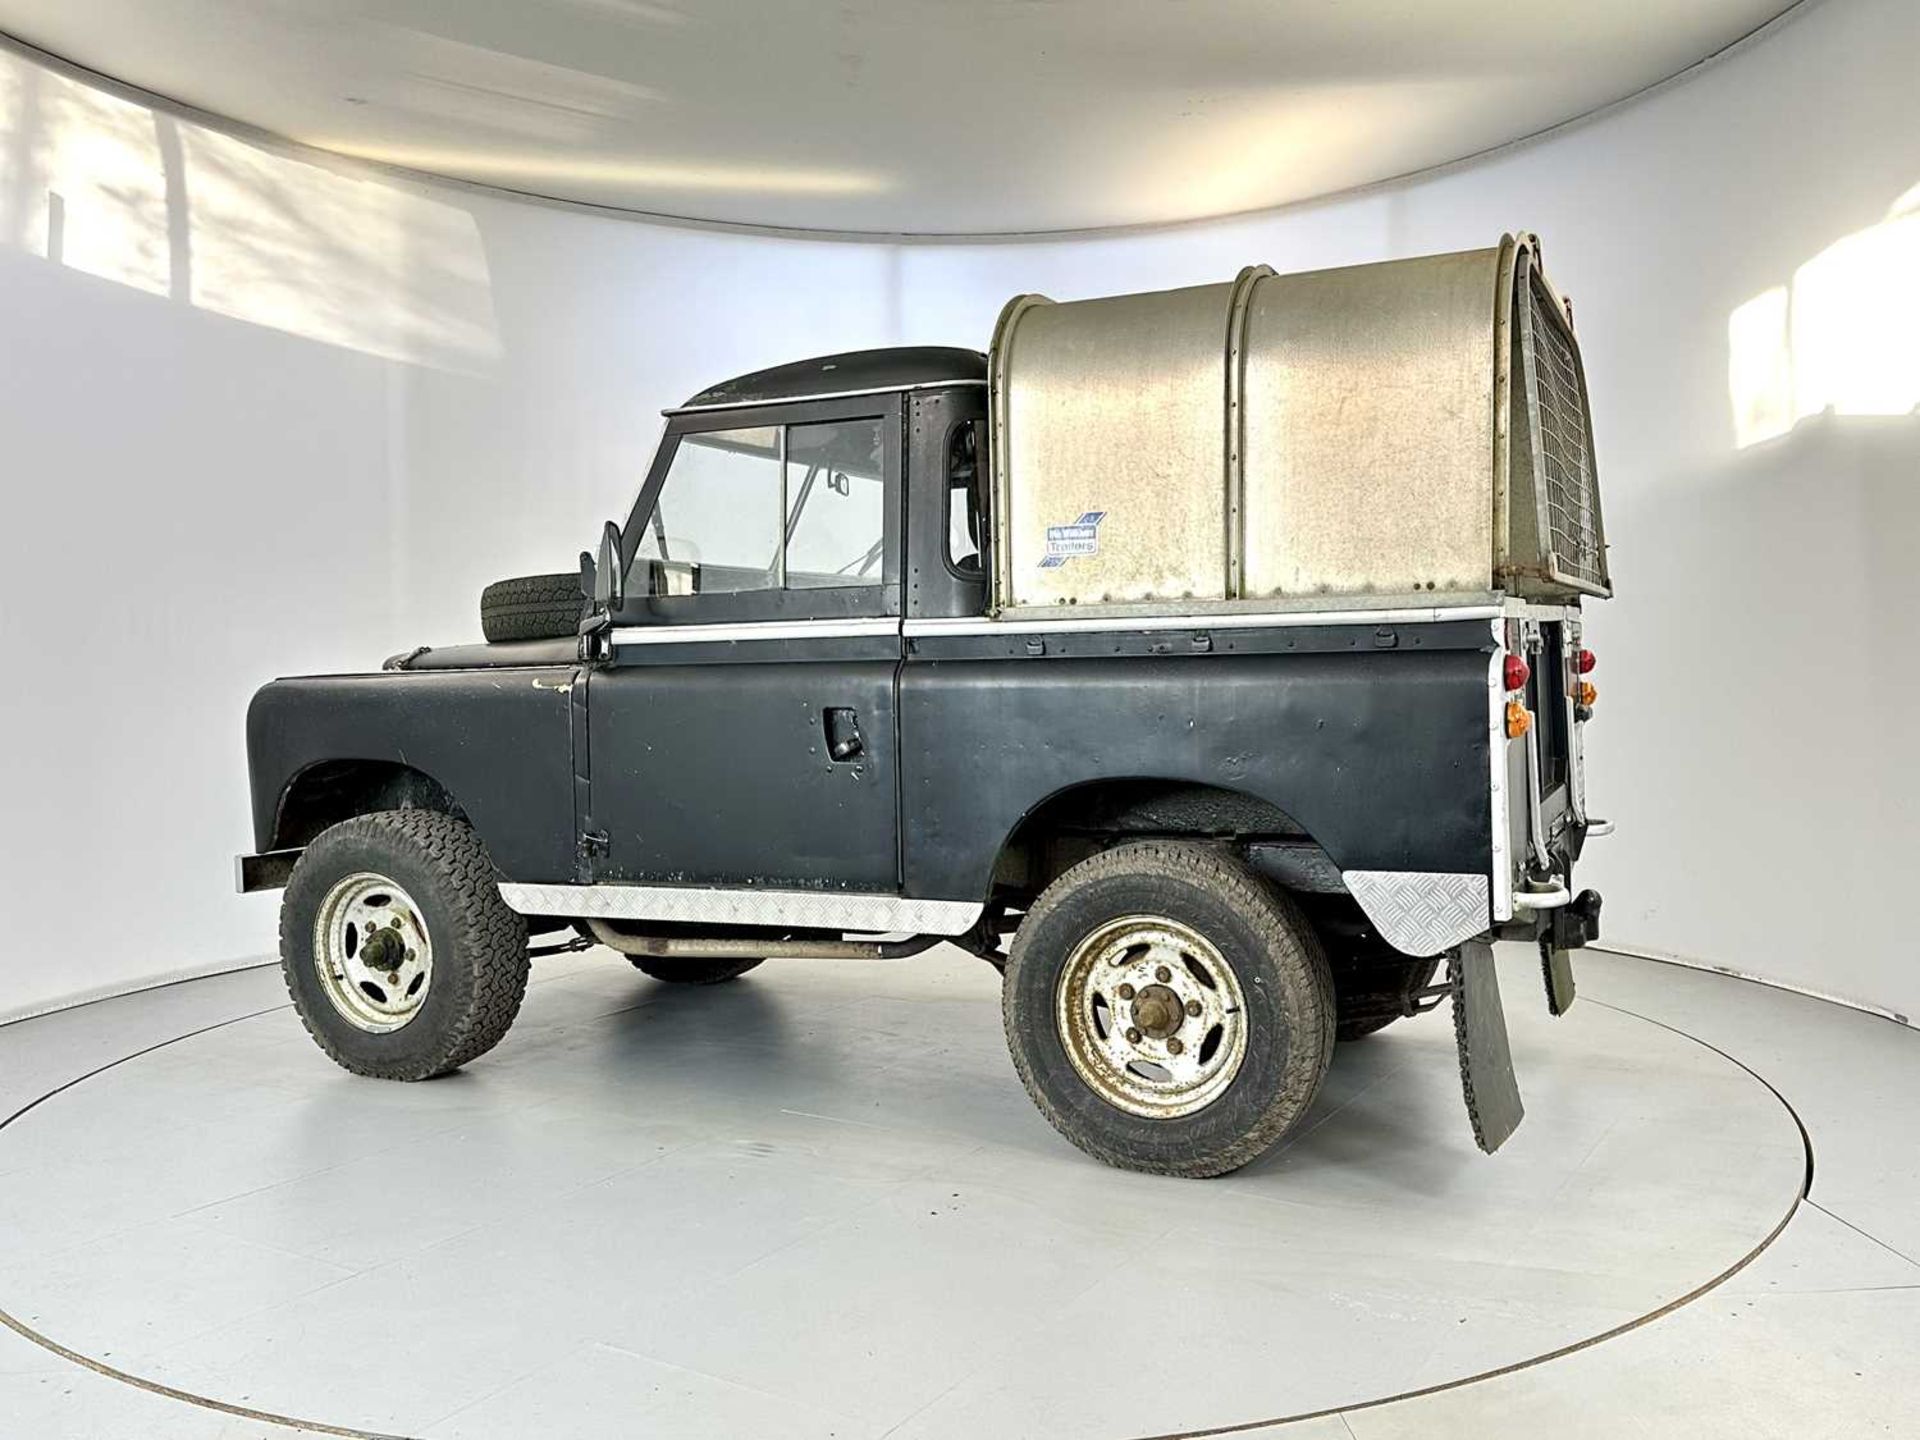 1969 Land Rover Series 2A - Image 6 of 27